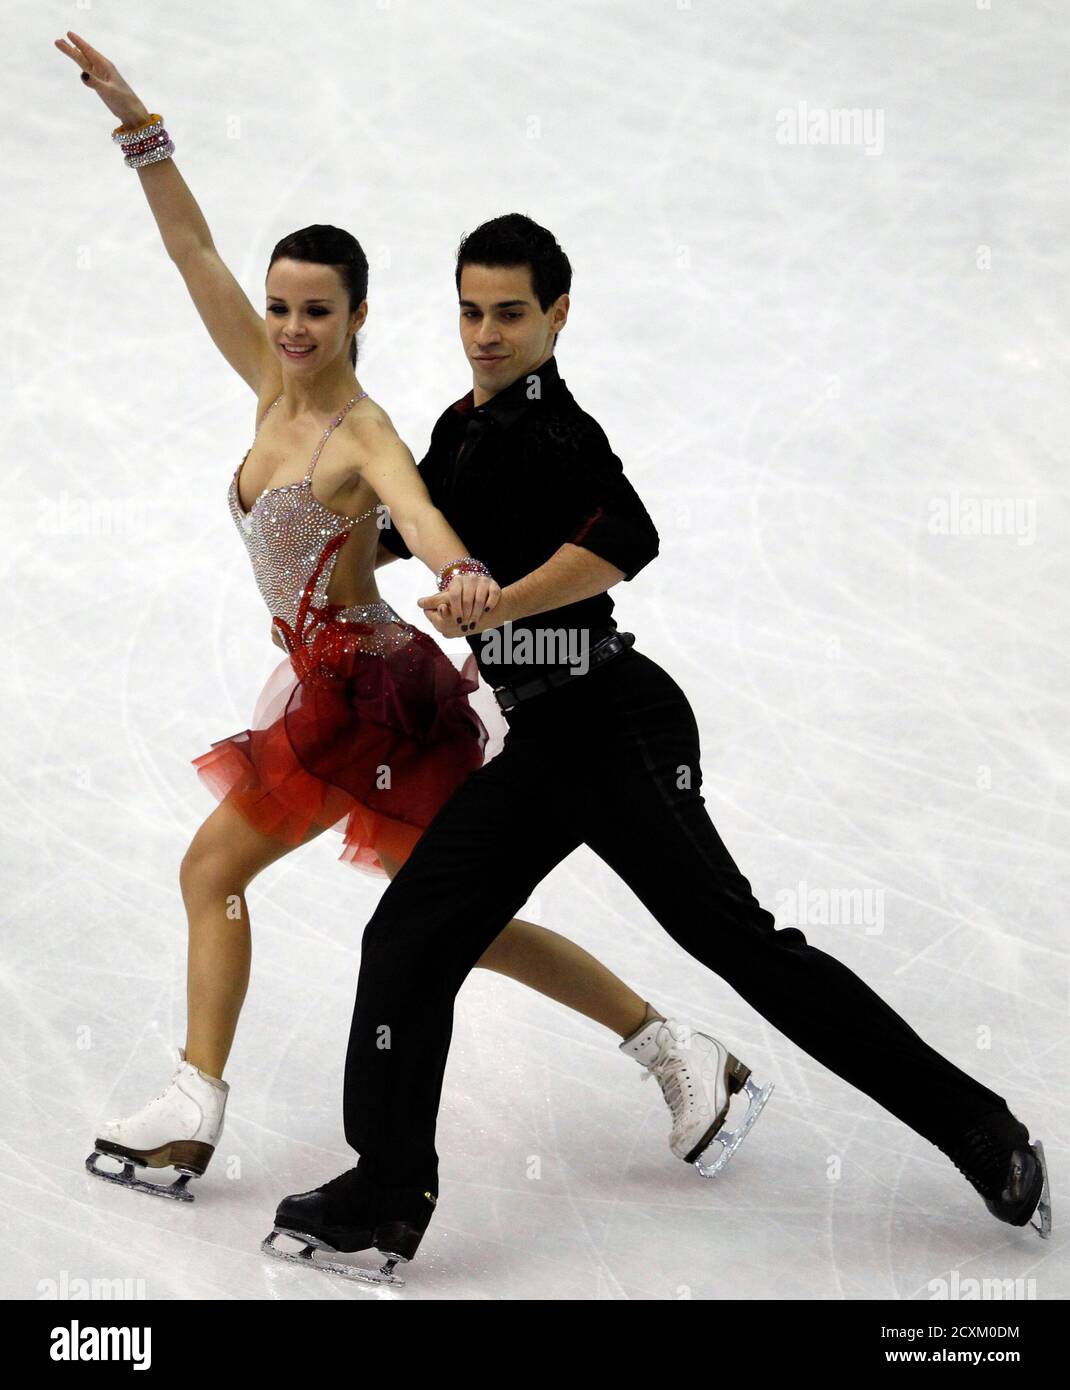 Anna Cappellini and Luca Lanotte of Italy perform during the ice dance  short dance at the ISU World Figure Skating Championships in Nice March 28,  2012. REUTERS/Jean-Paul Pelissier (FRANCE - Tags: SPORT